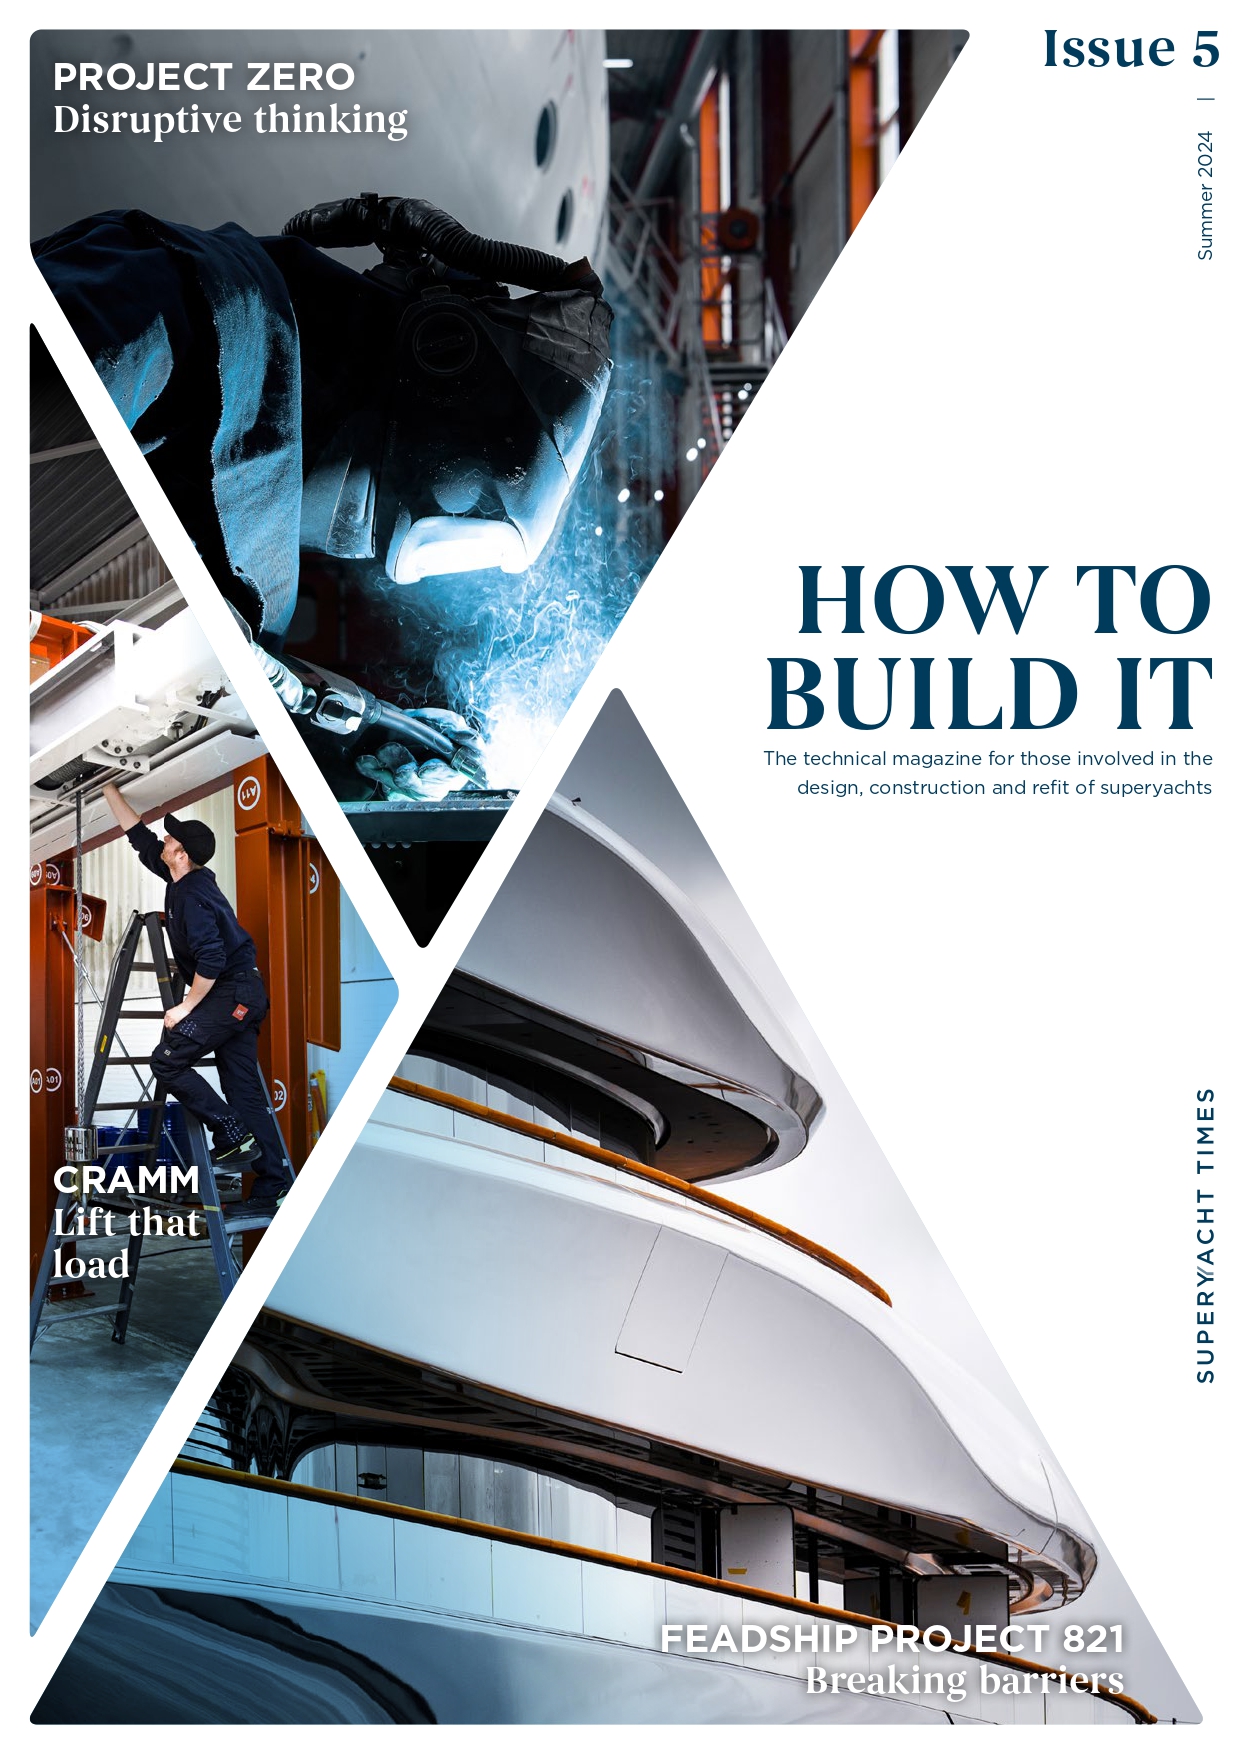 SuperYacht Times | How To Build It, Issue 5